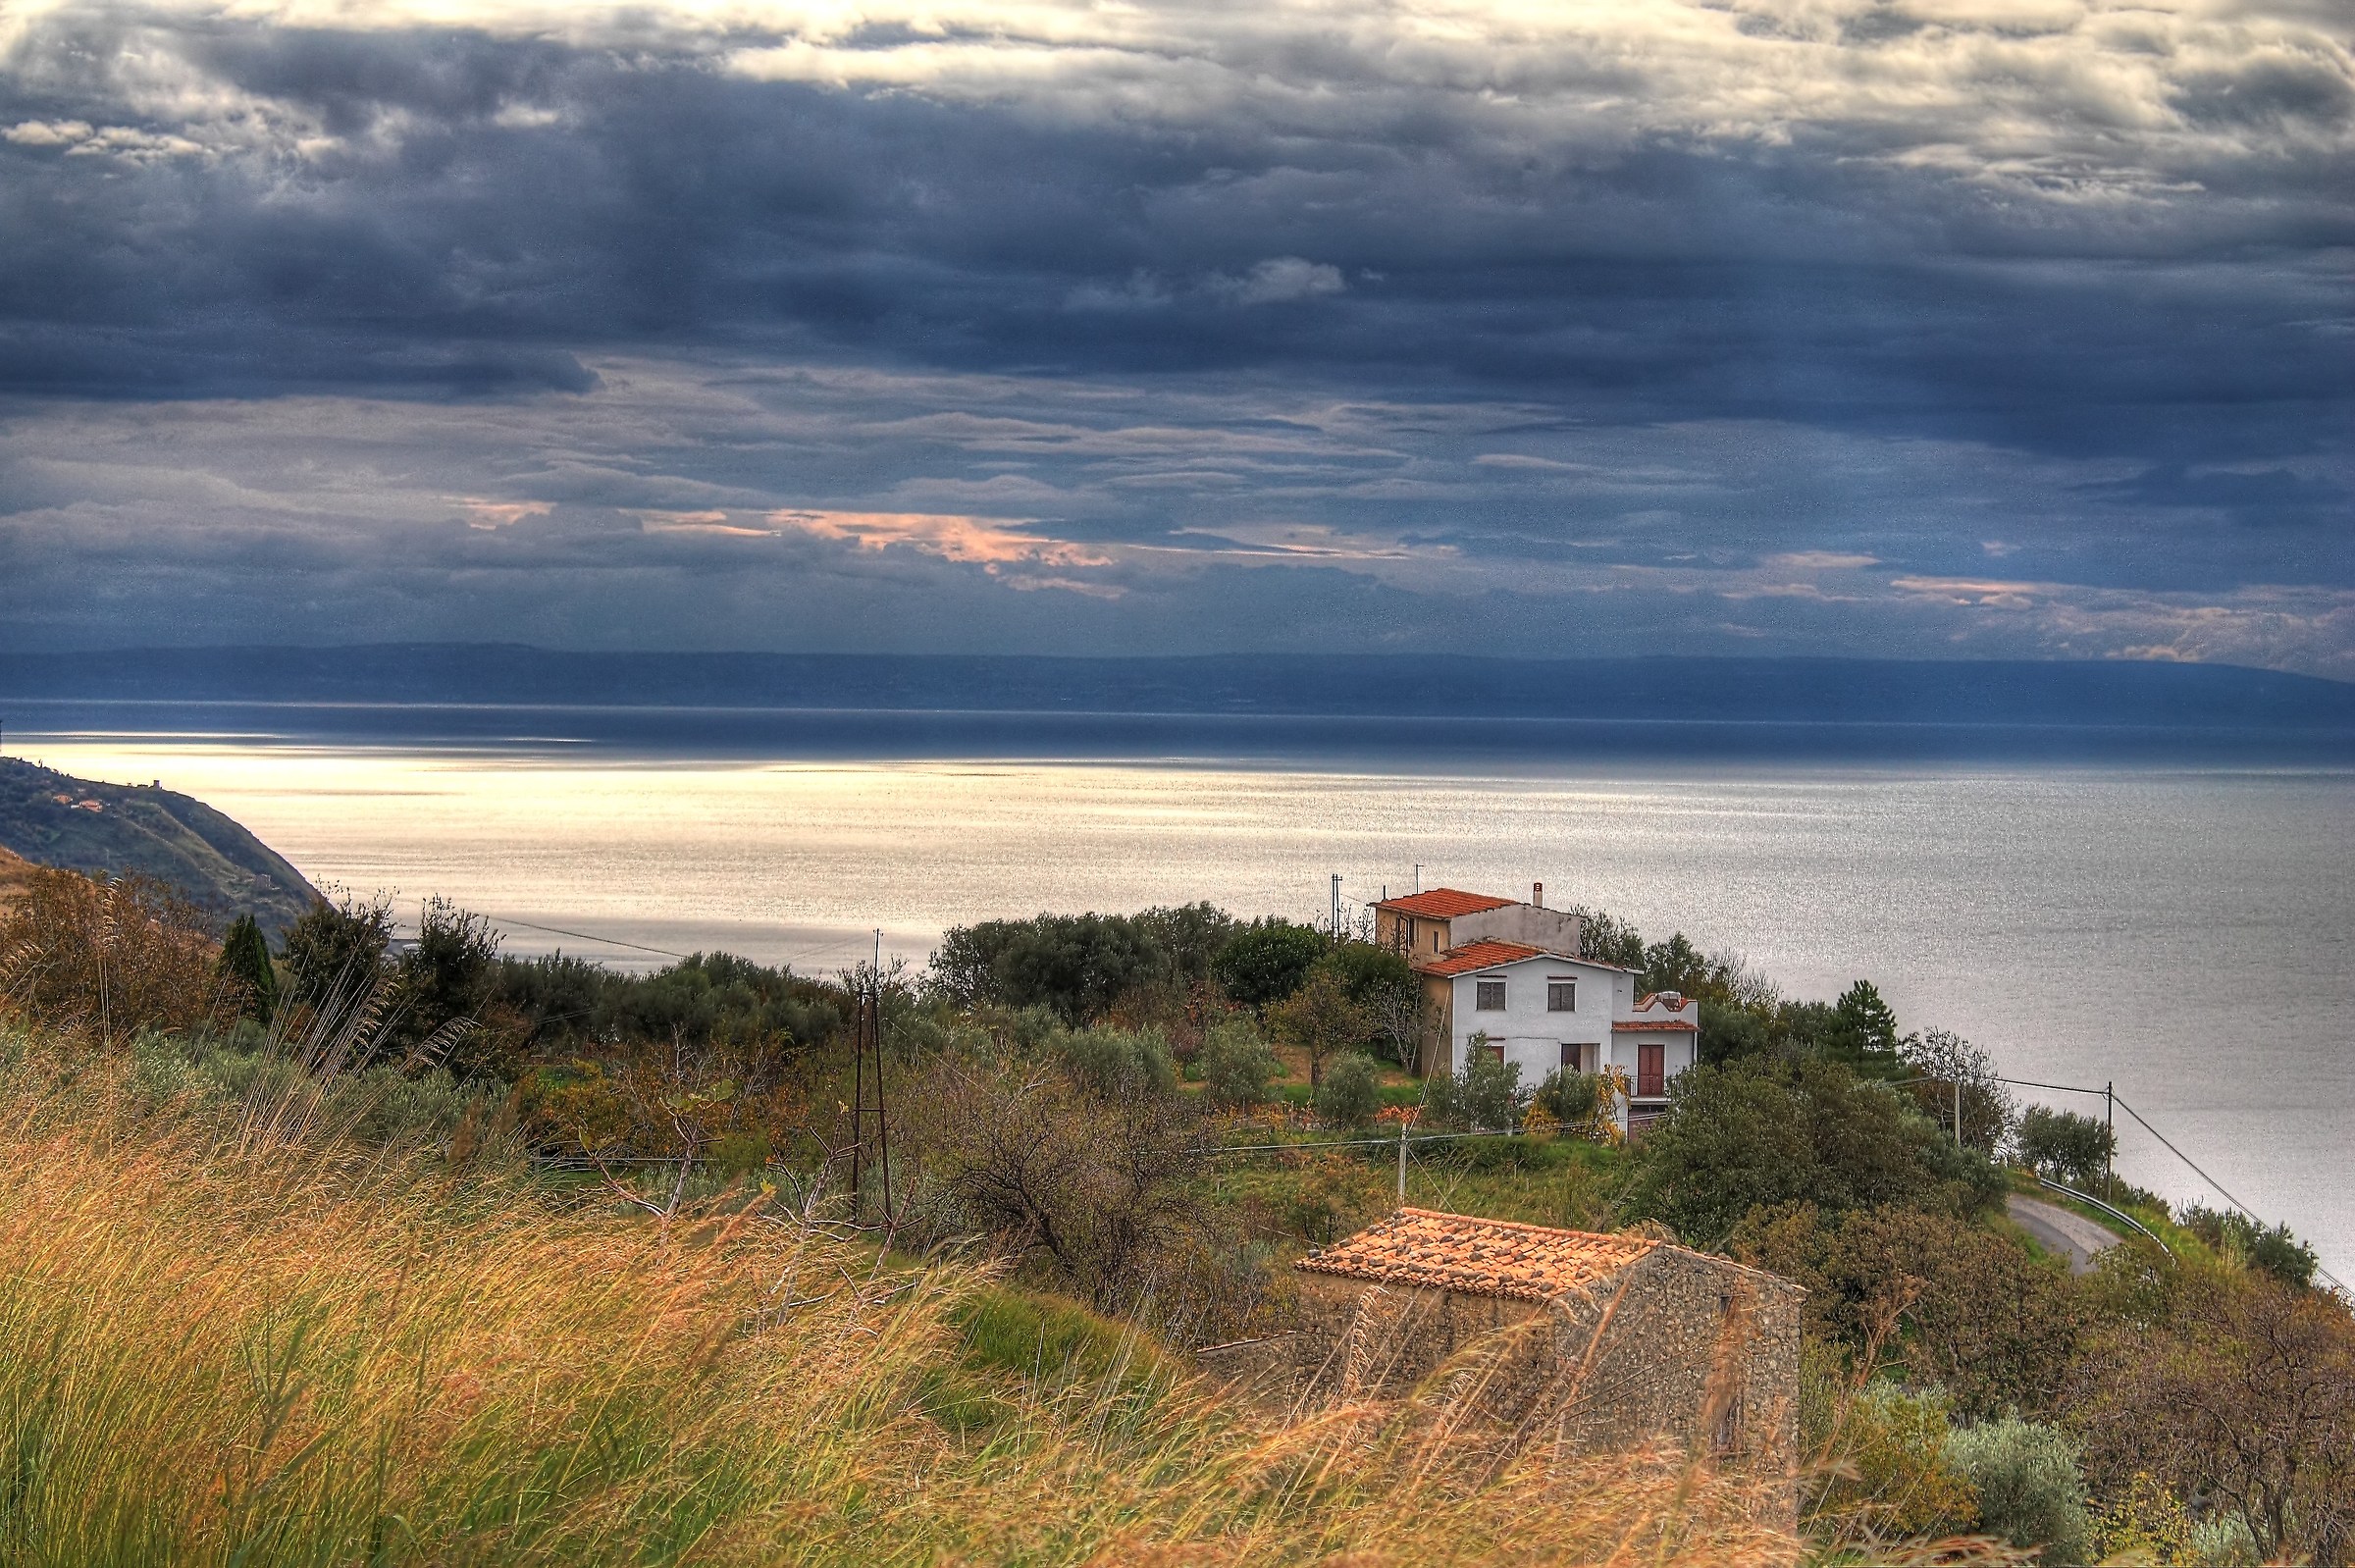 The little house on the hill - HDR...